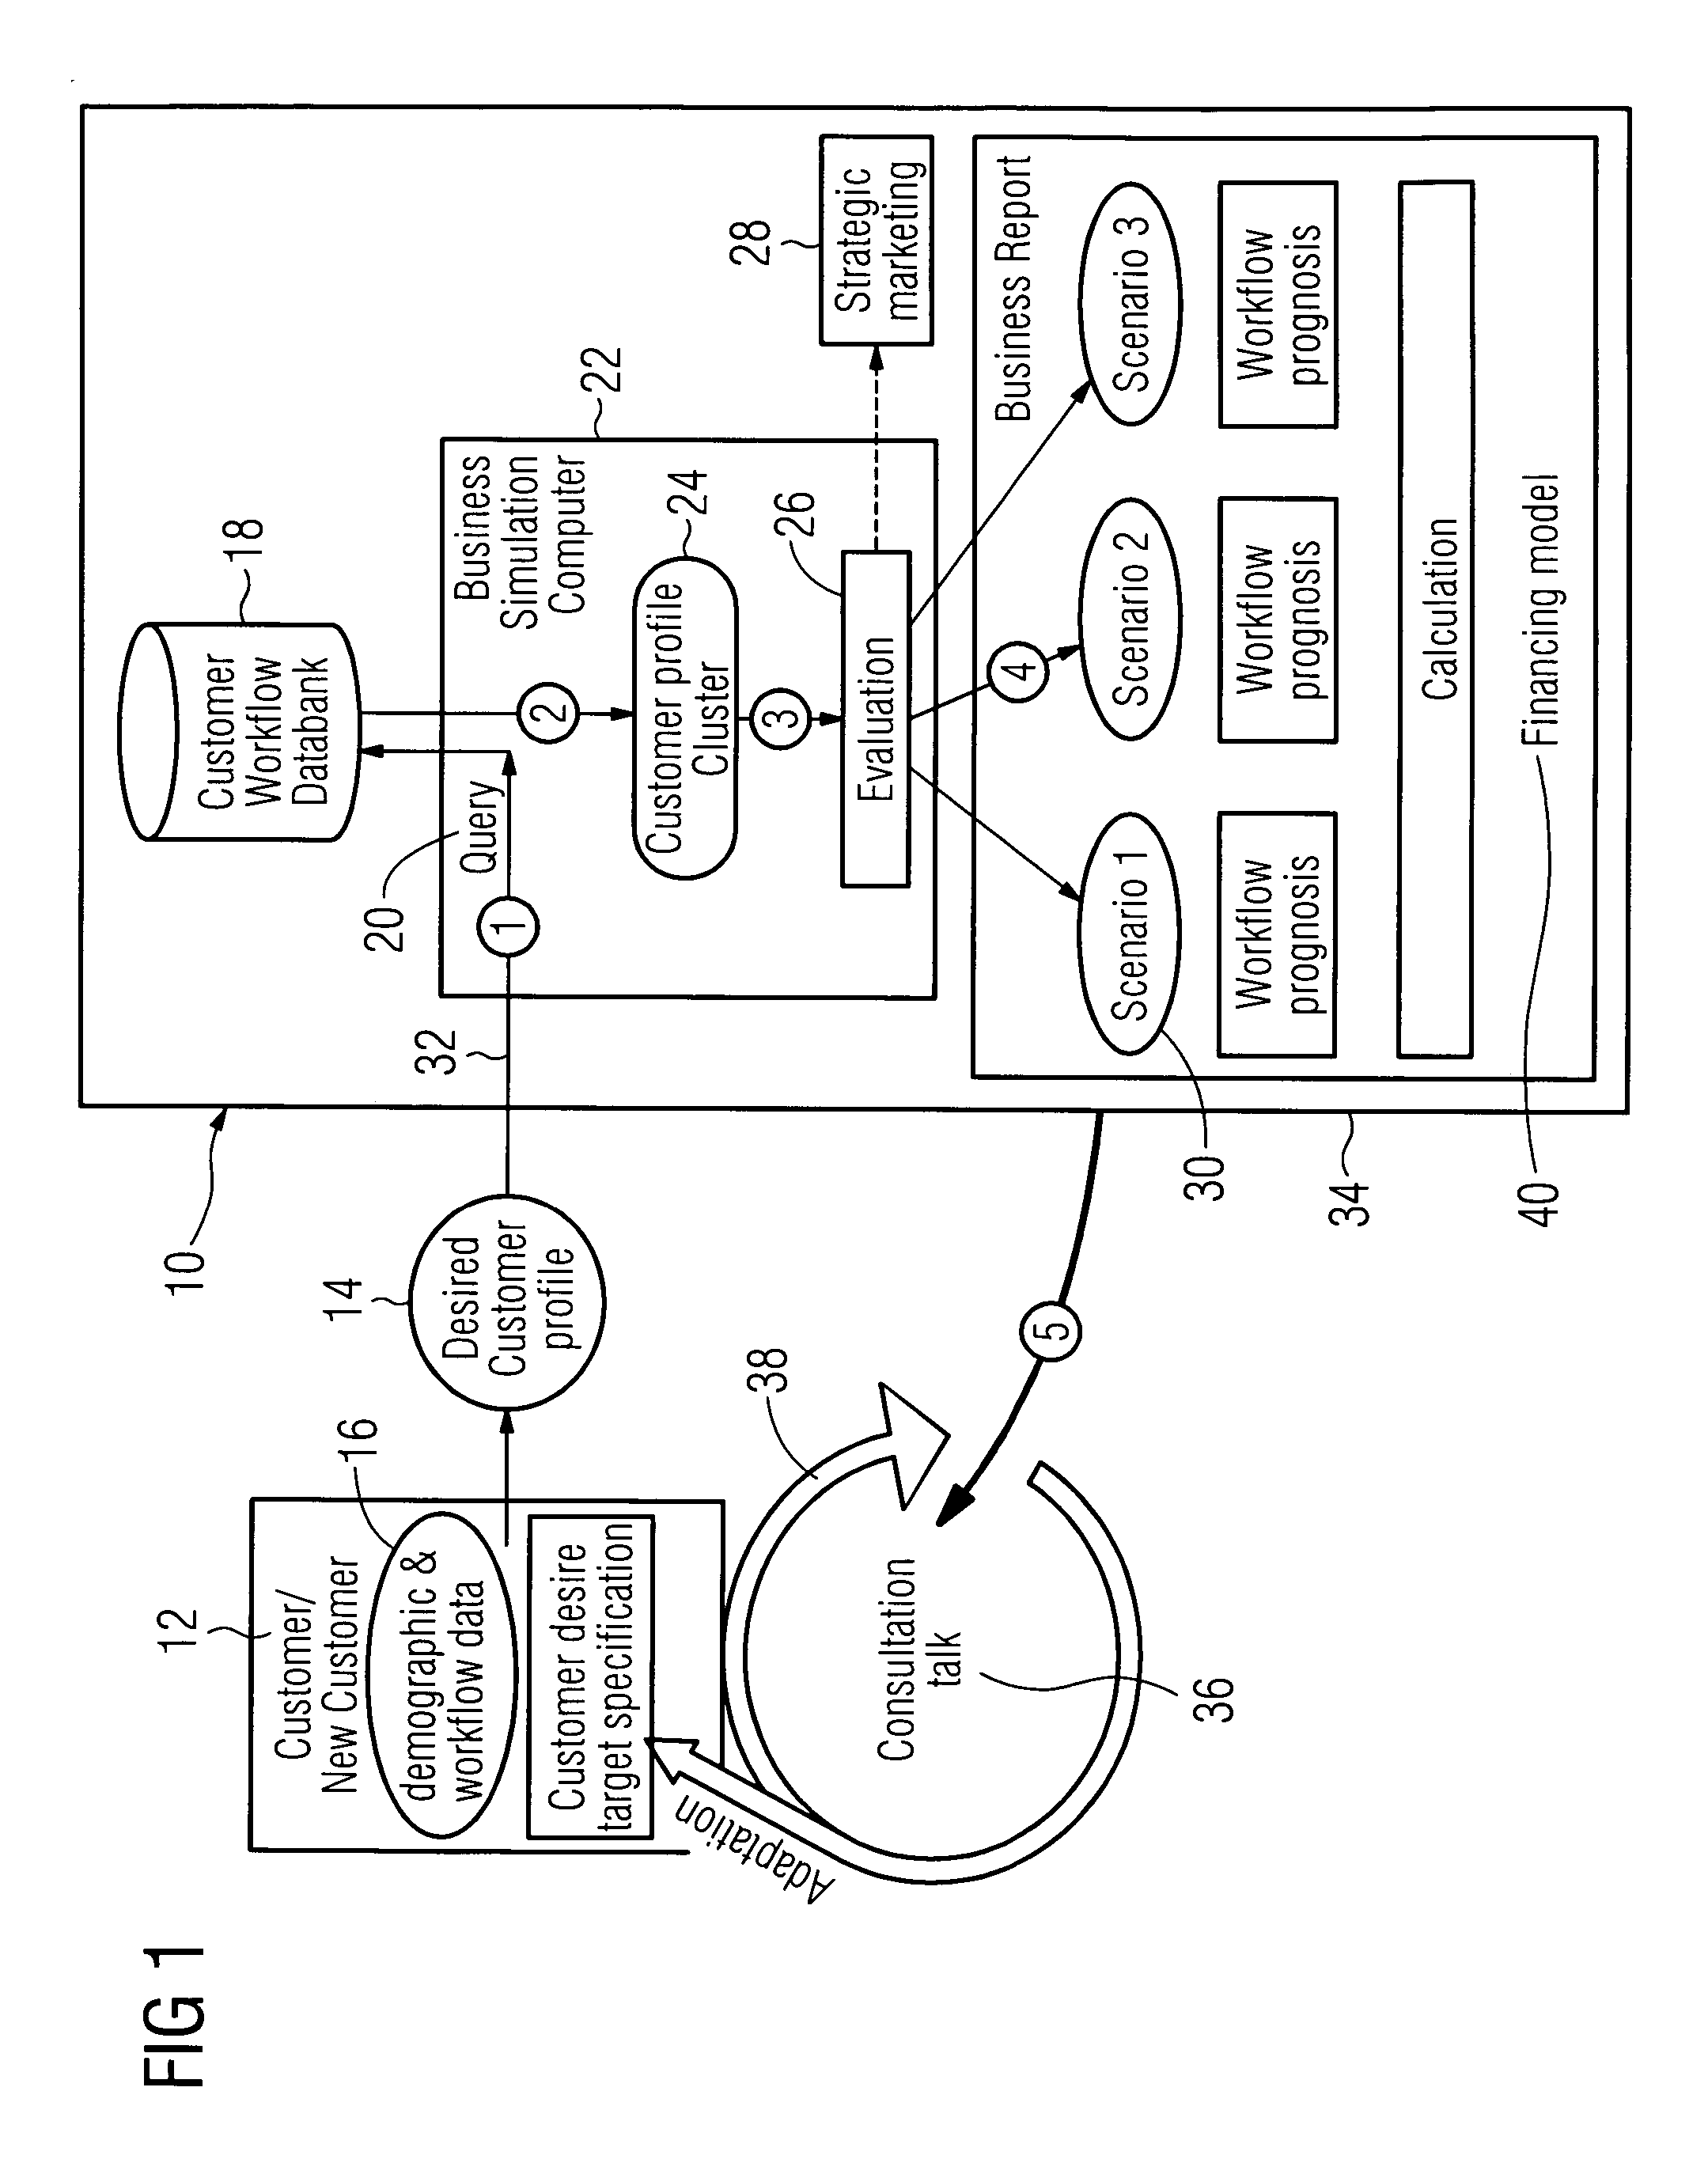 Business simulator method and apparatus based on clinical workflow parameters